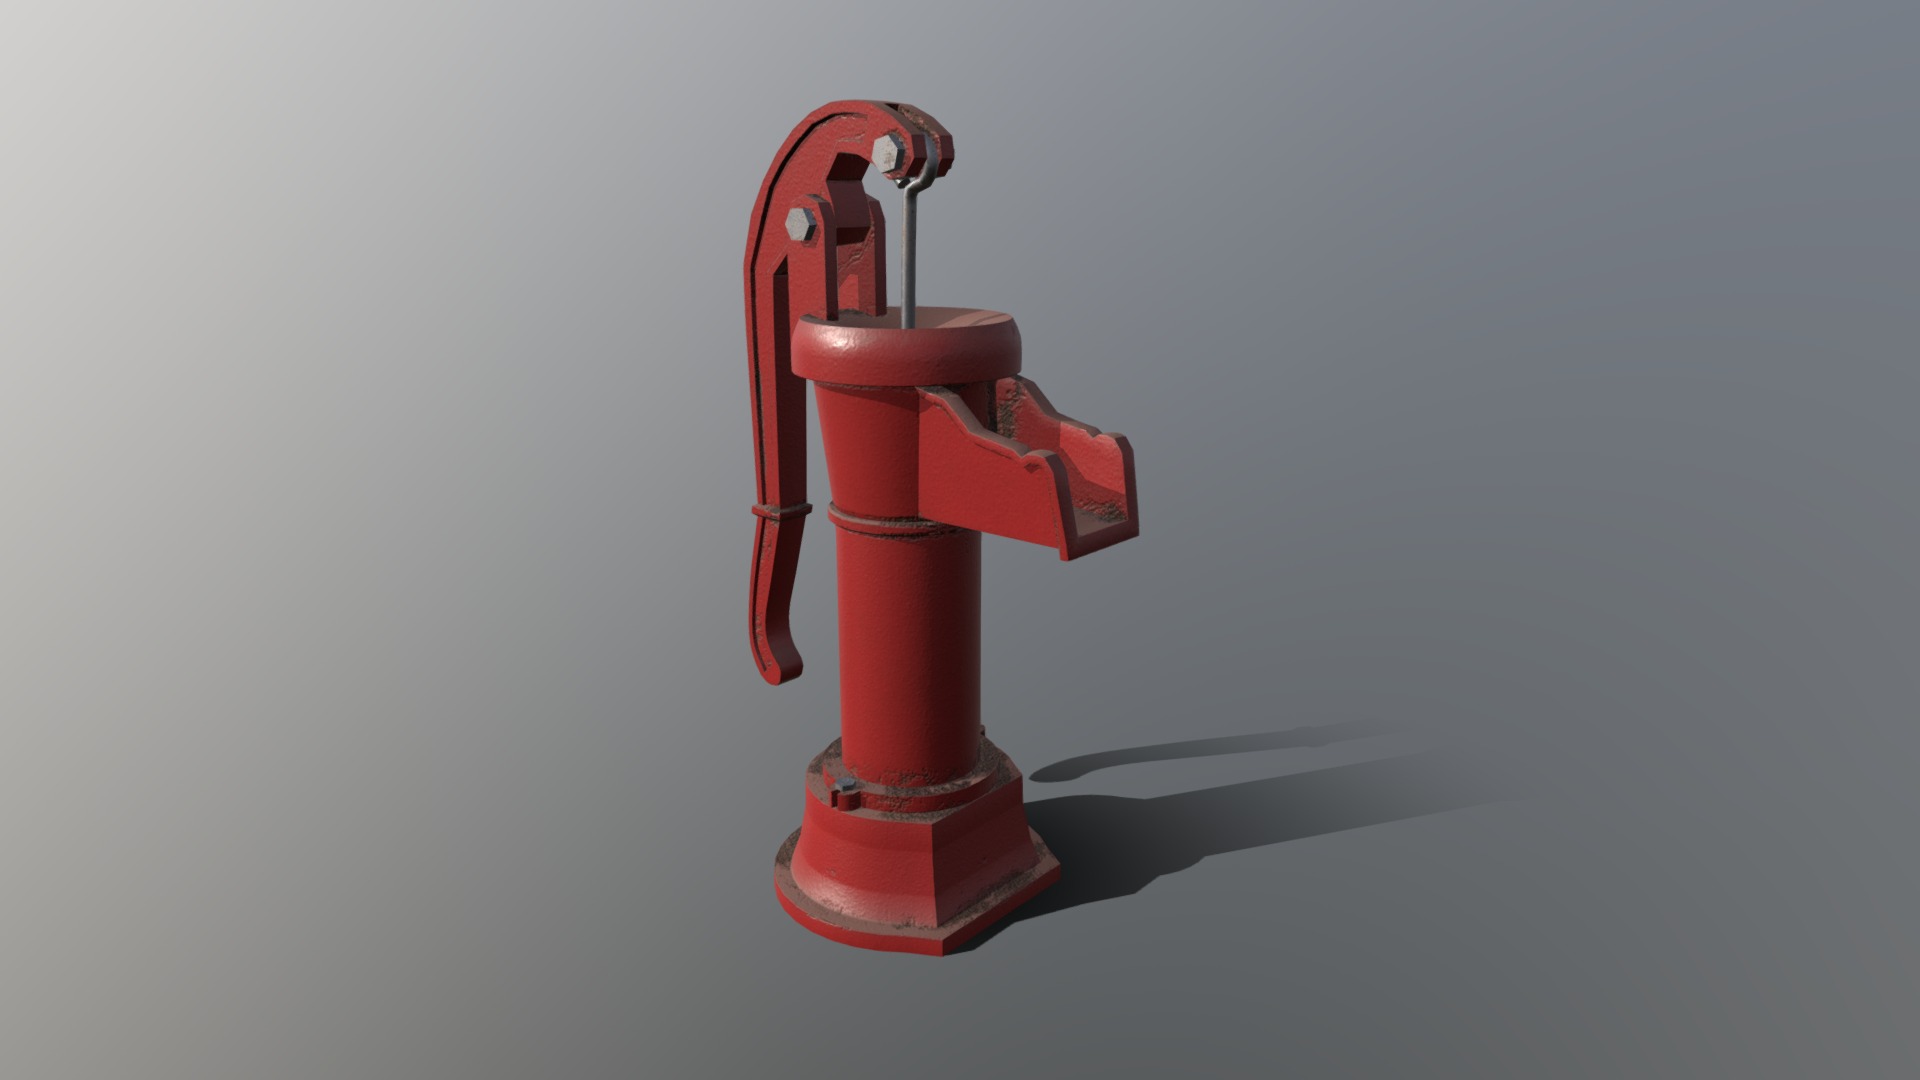 3D model Pitcher Pump - This is a 3D model of the Pitcher Pump. The 3D model is about a red and white metal object.